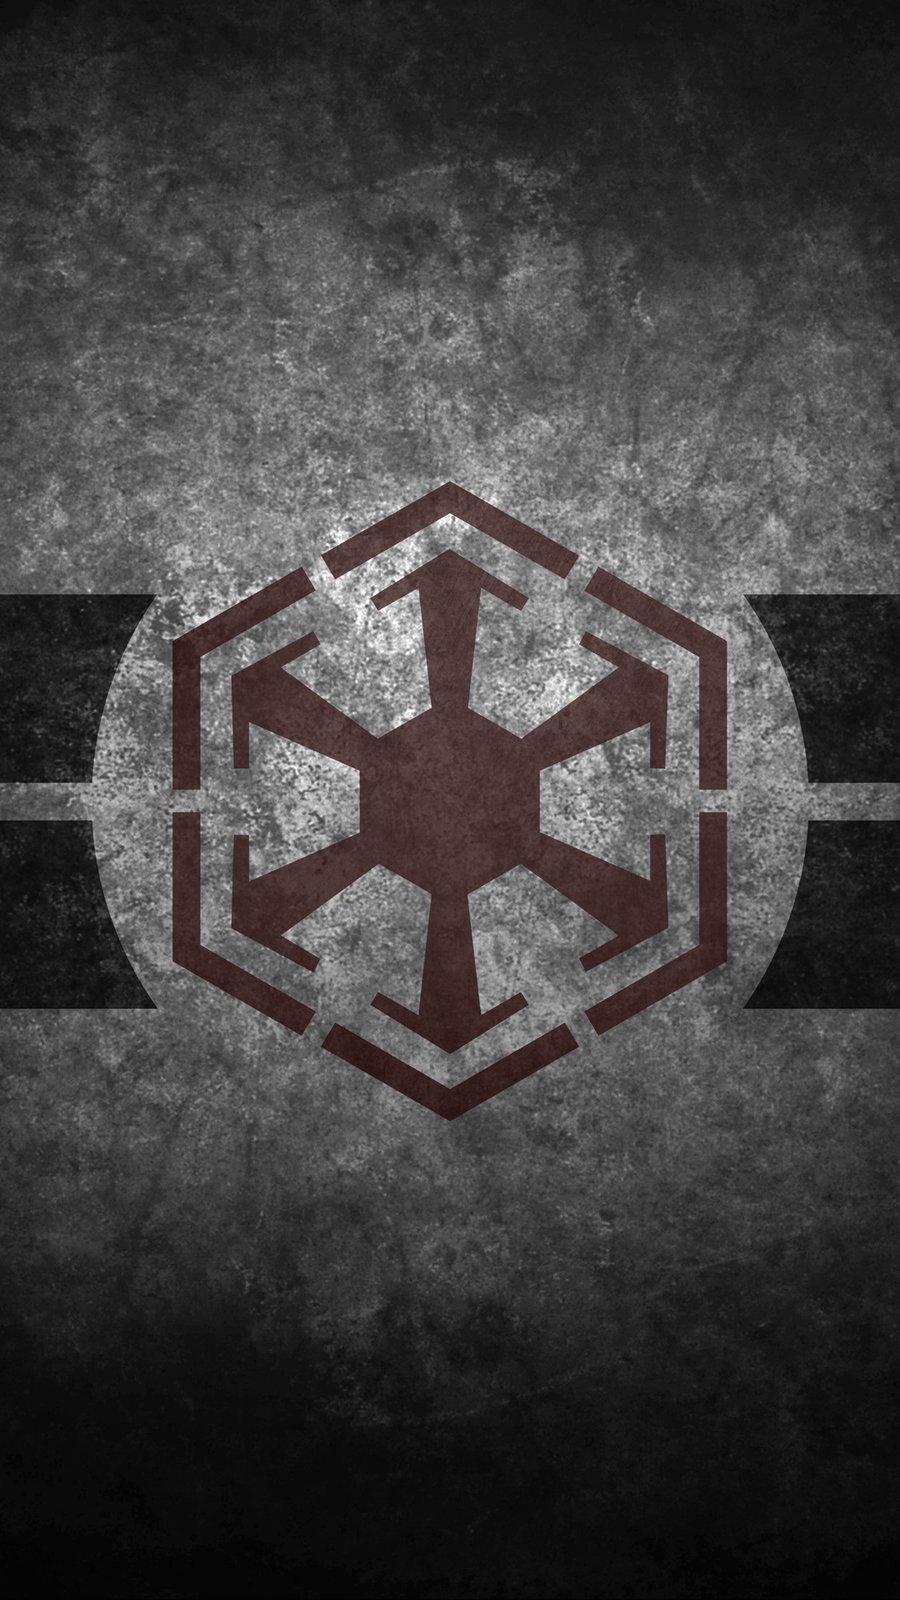 Star Wars Sith Empire Symbol Cellphone Wallpaper By Swmand4 On